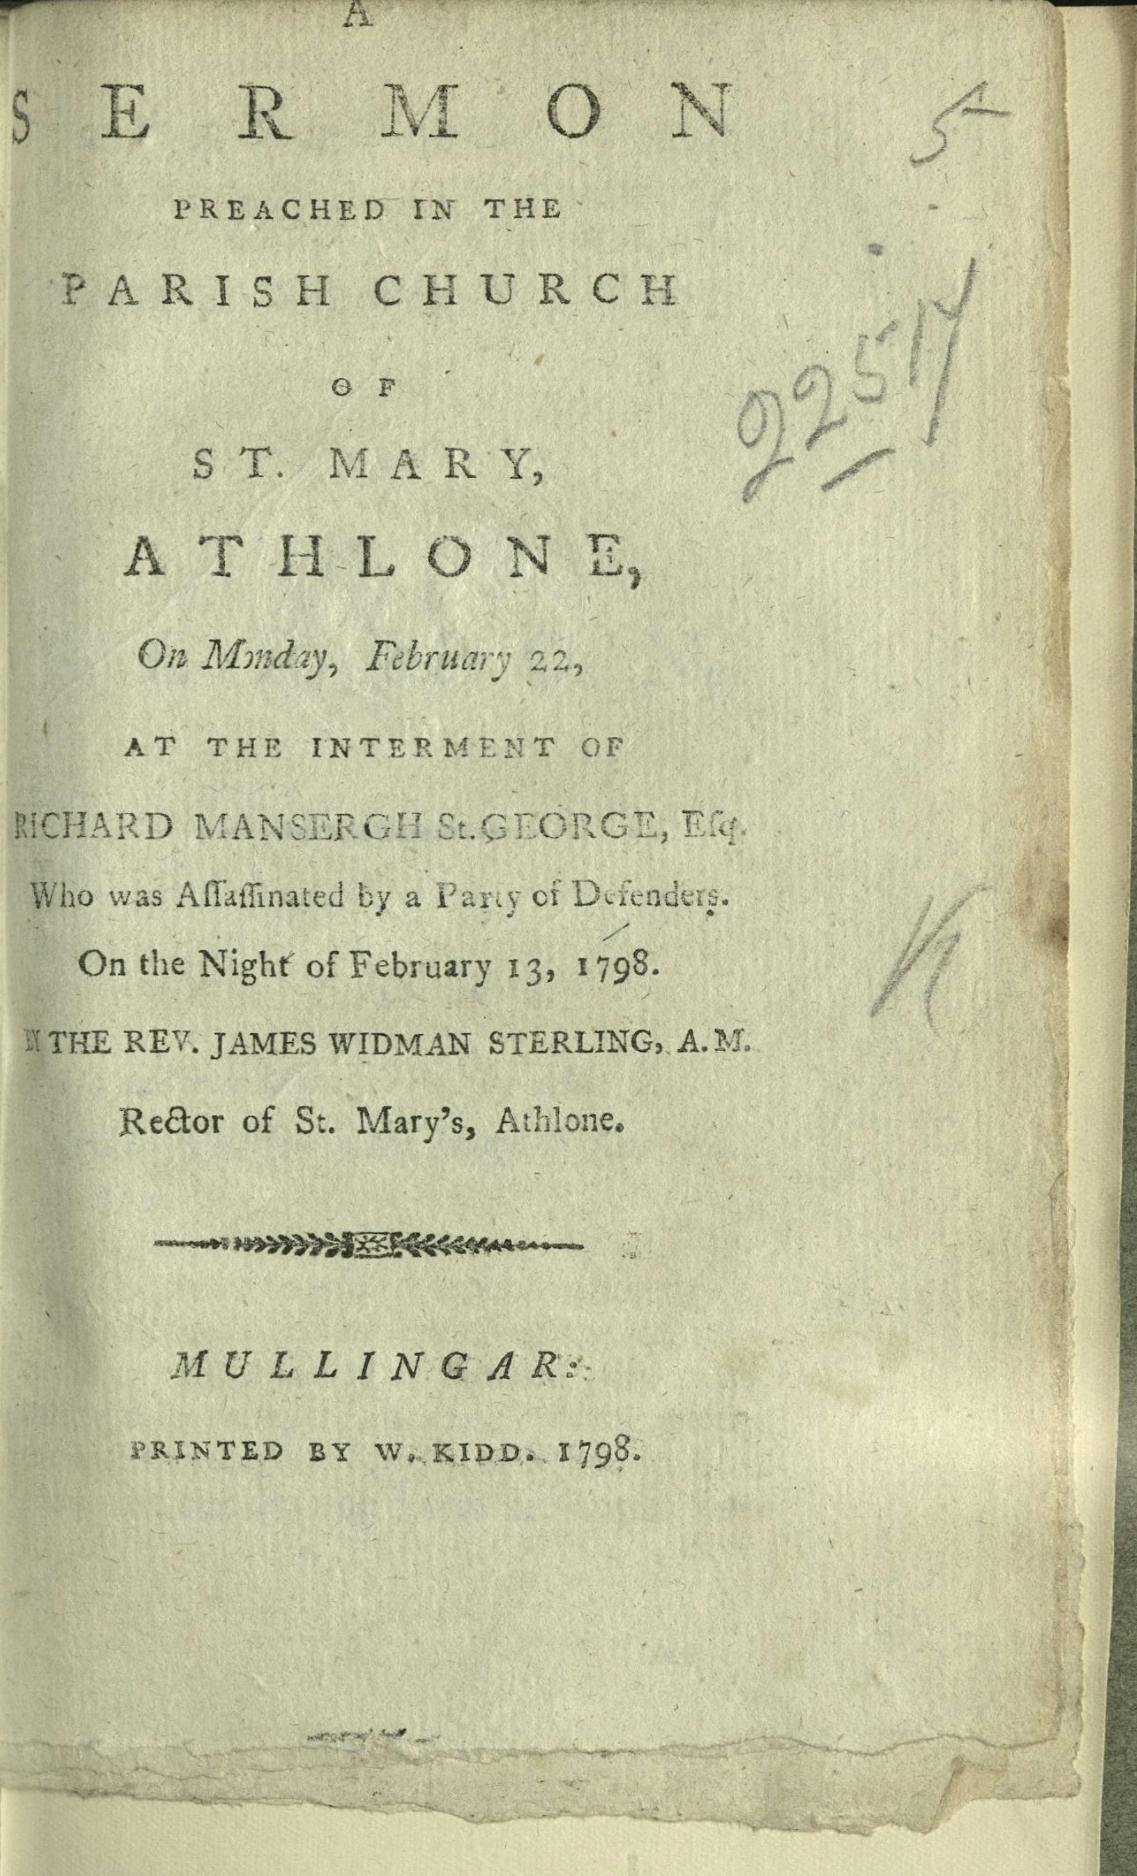 “A Sermon Preached in the Parish Church of St. Mary, Athlone”